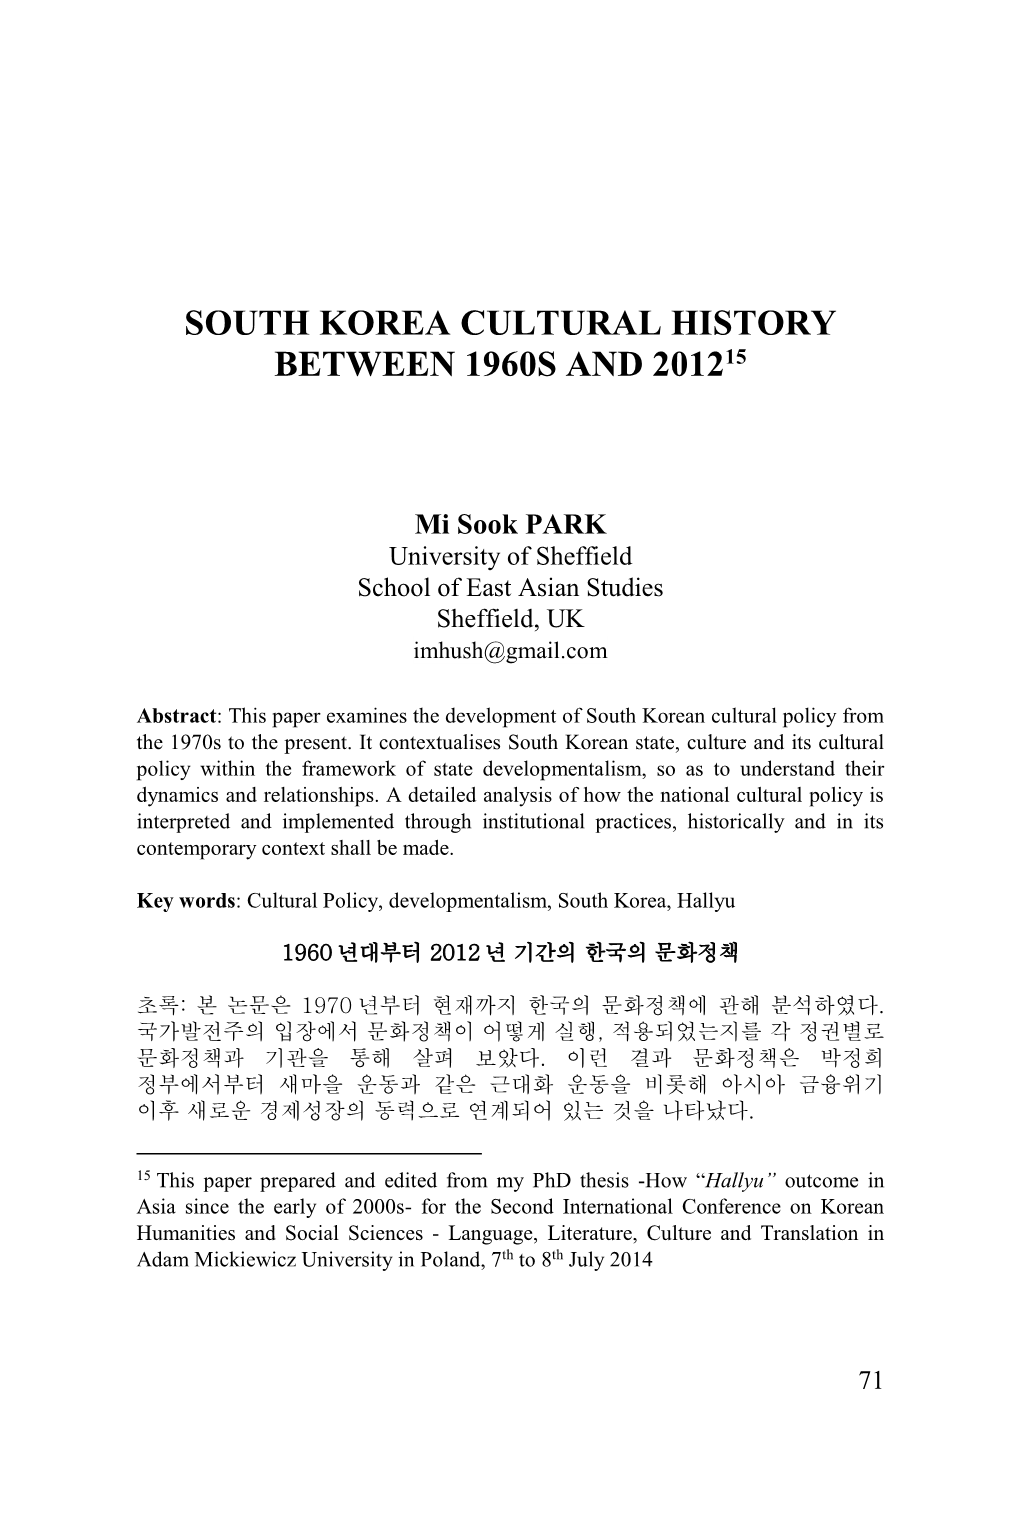 South Korea Cultural History Between 1960S and 201215